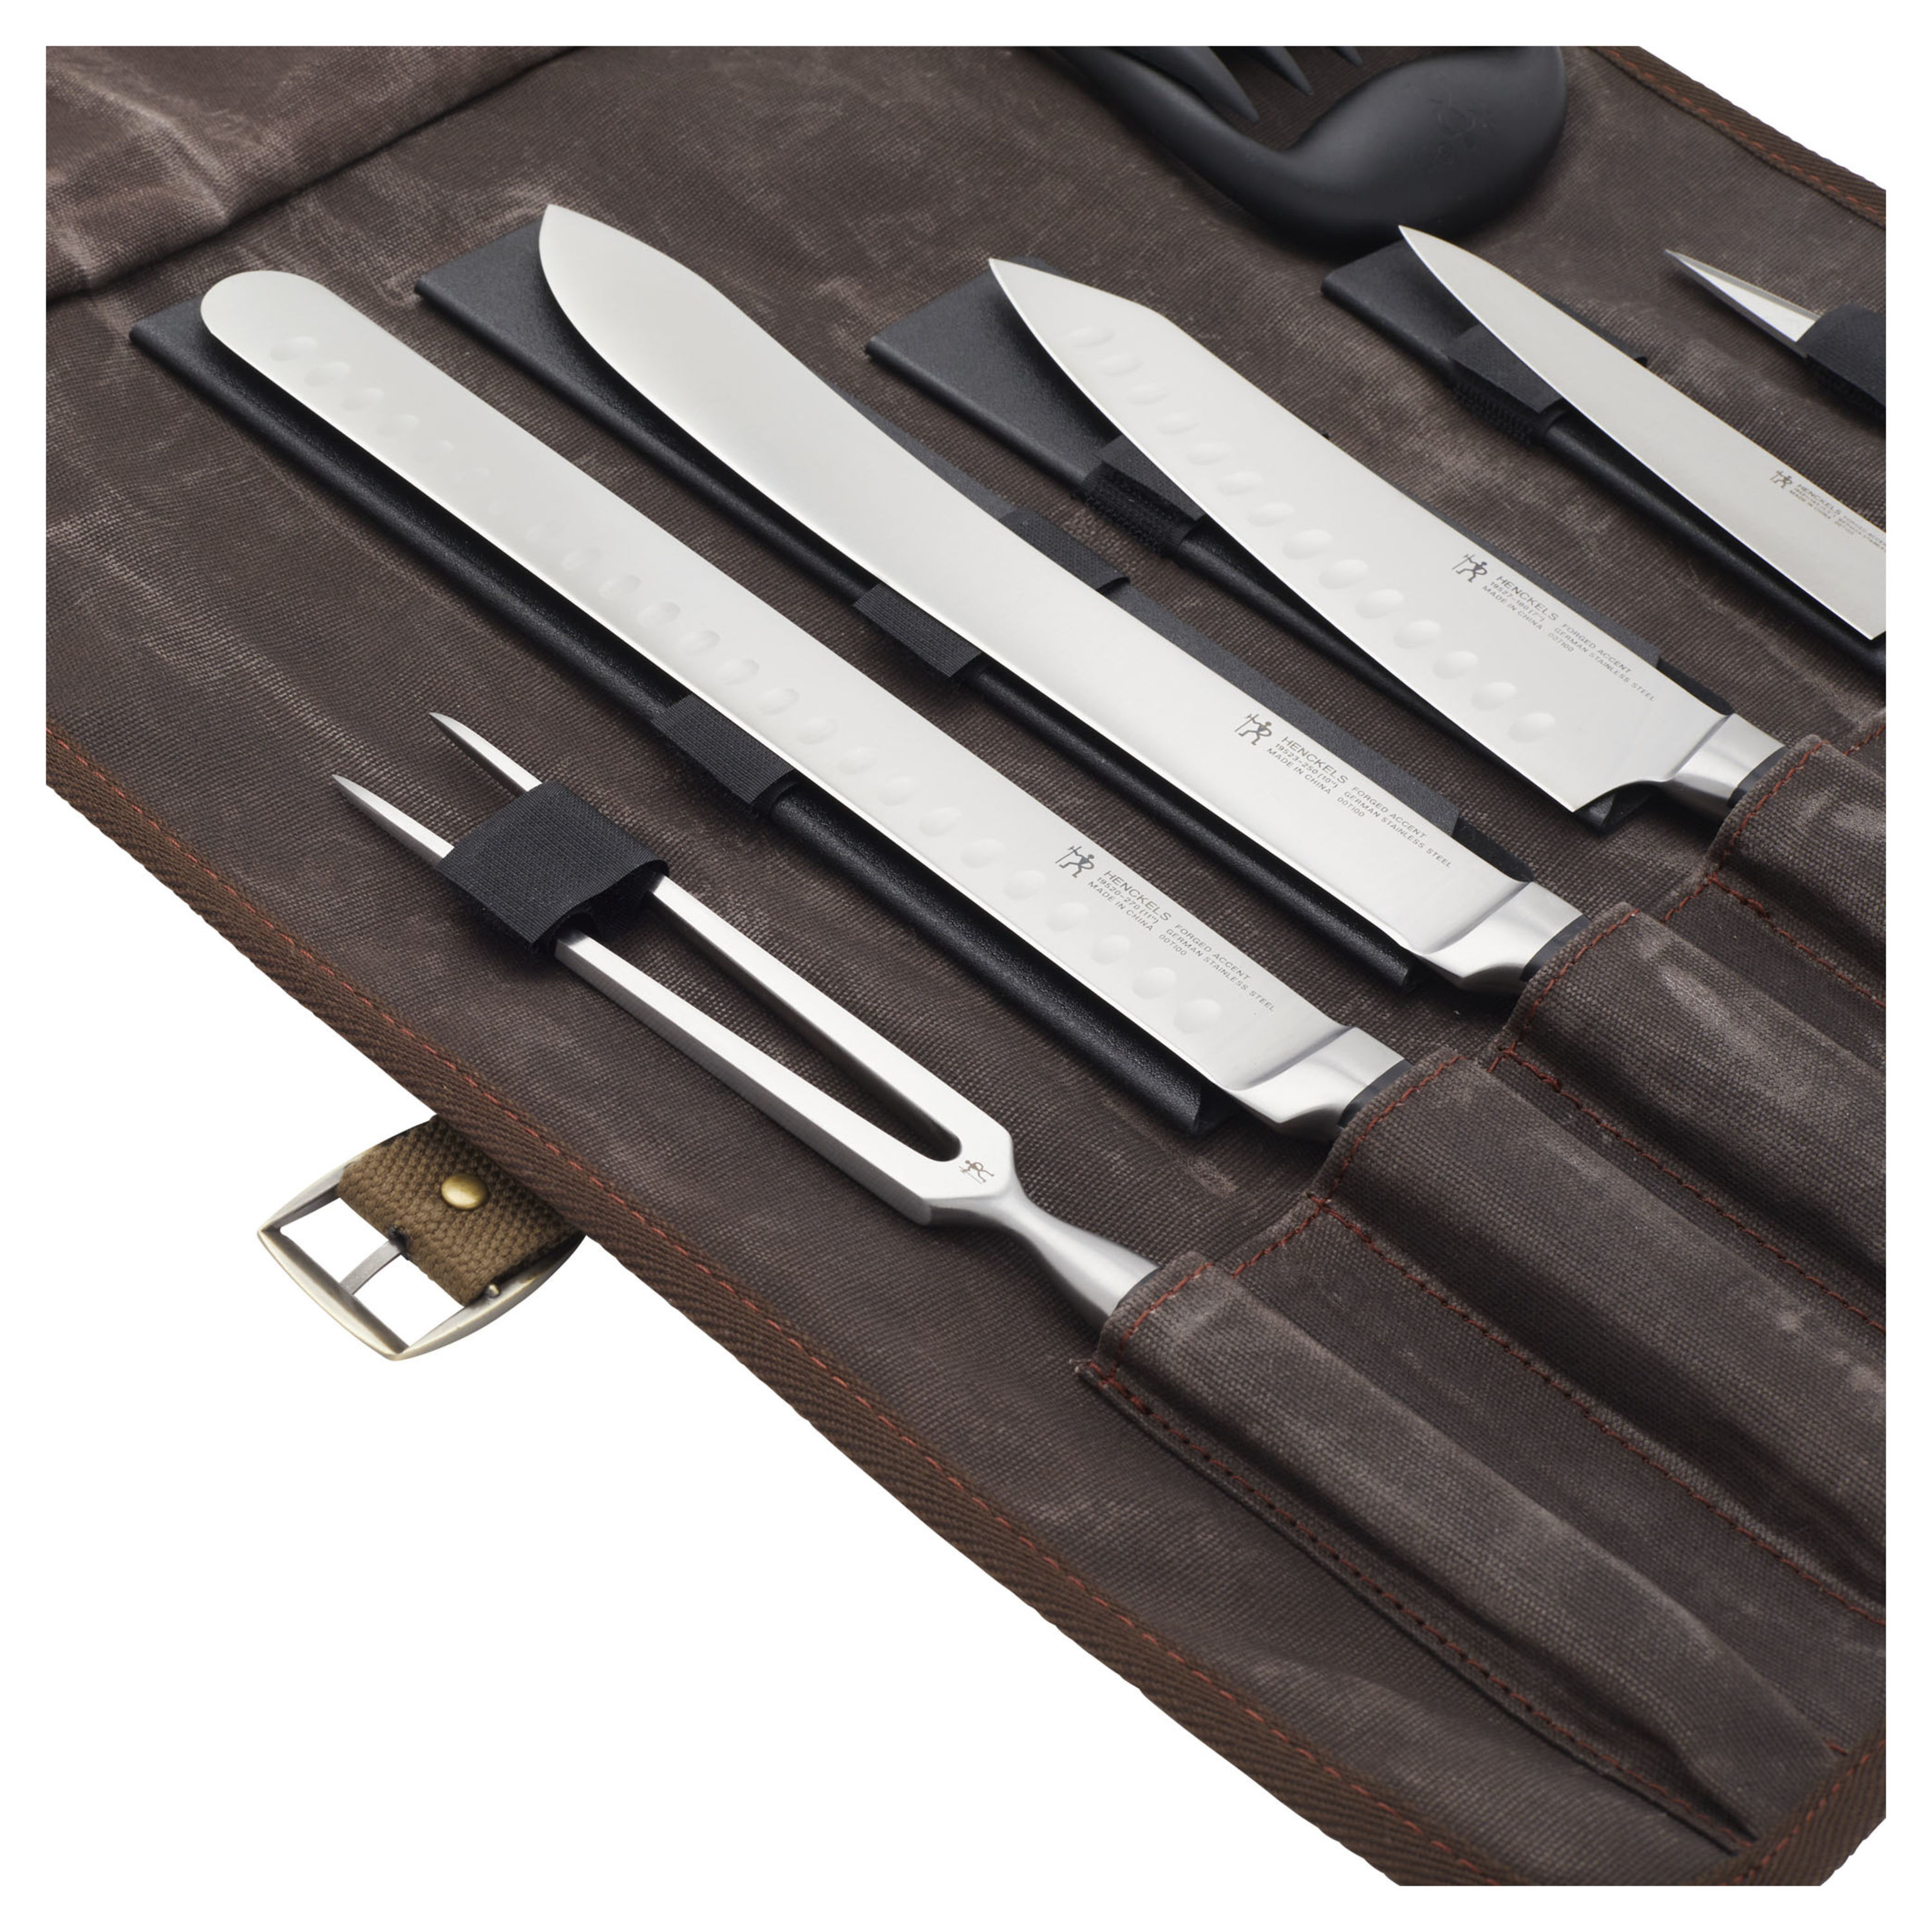 Buy Henckels Forged Accent Knife set